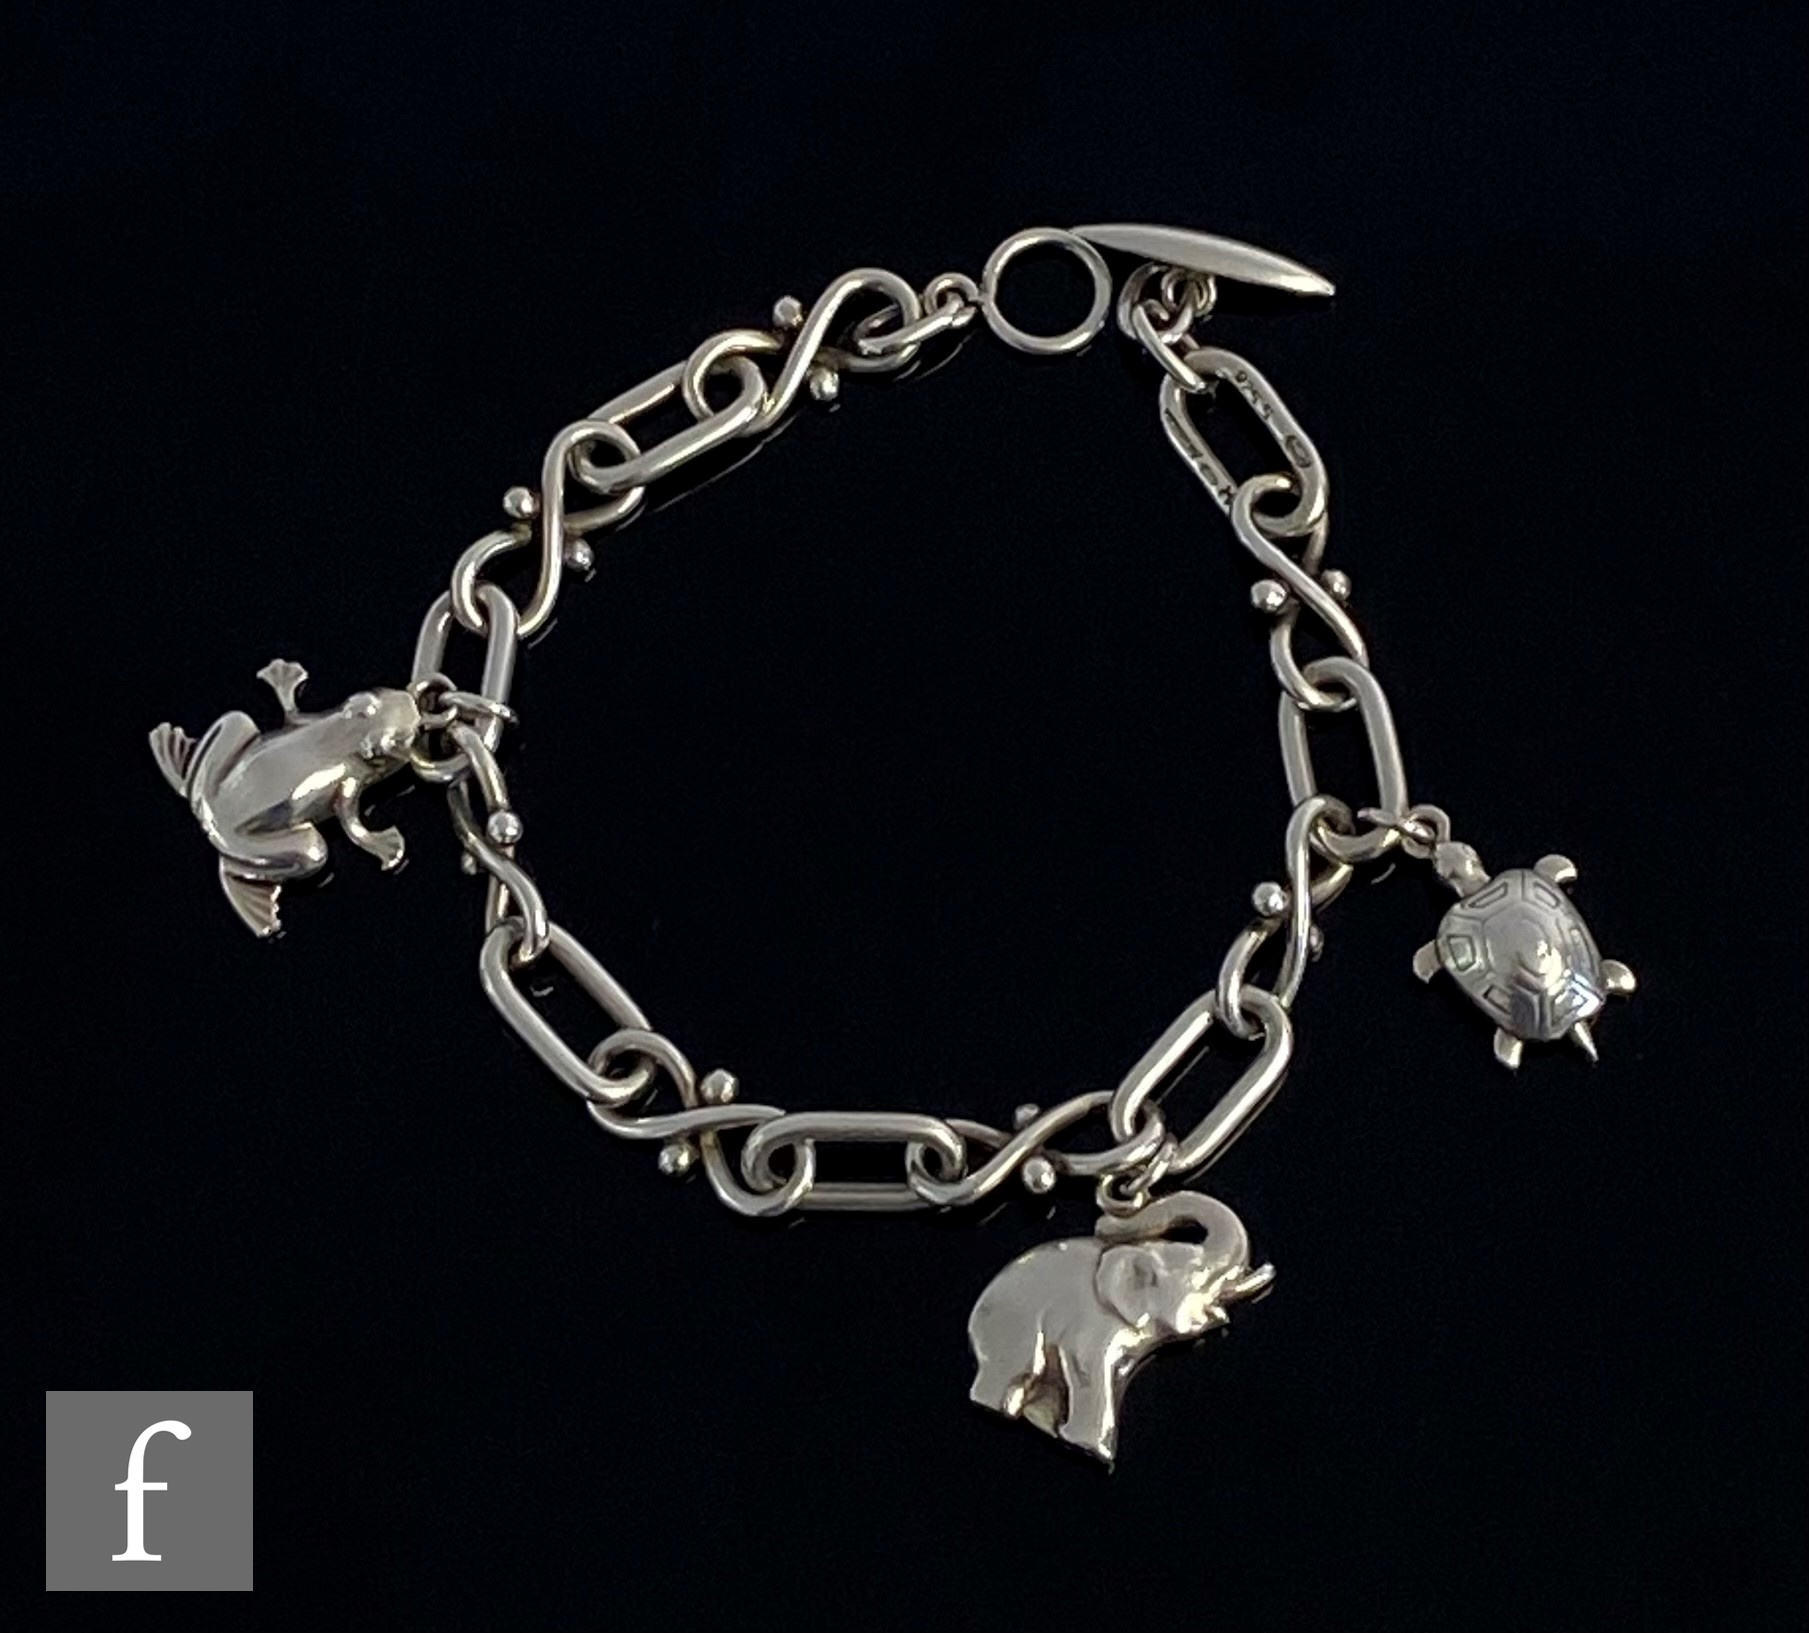 A Danish silver cable link bracelet terminating in t-bar and eye clasp with three animal charms